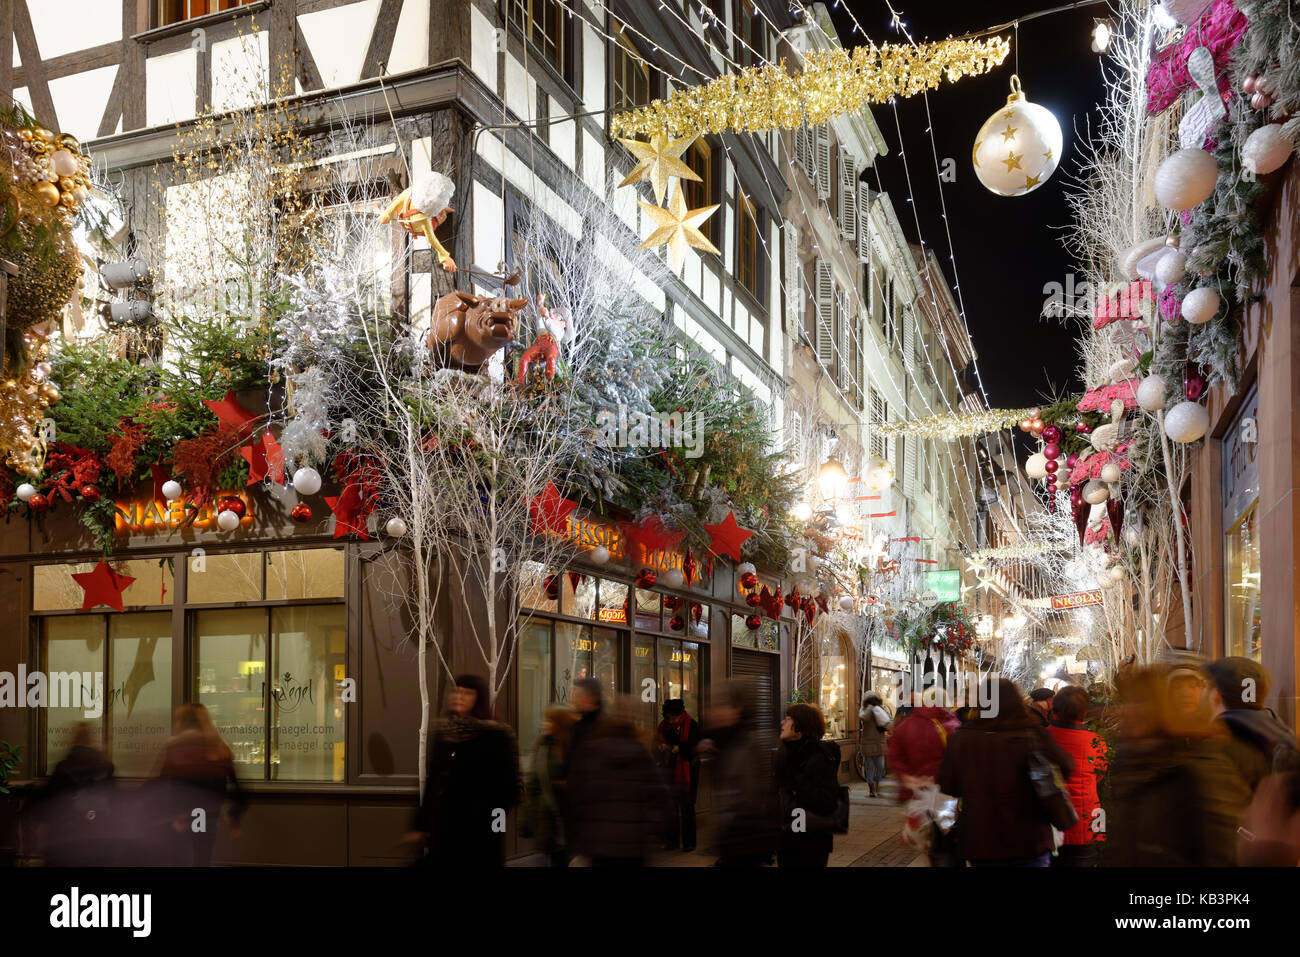 France, Bas Rhin, Strasbourg, old town listed as World Heritage by UNESCO, Christmas decoration at rue des Orfèvres Stock Photo